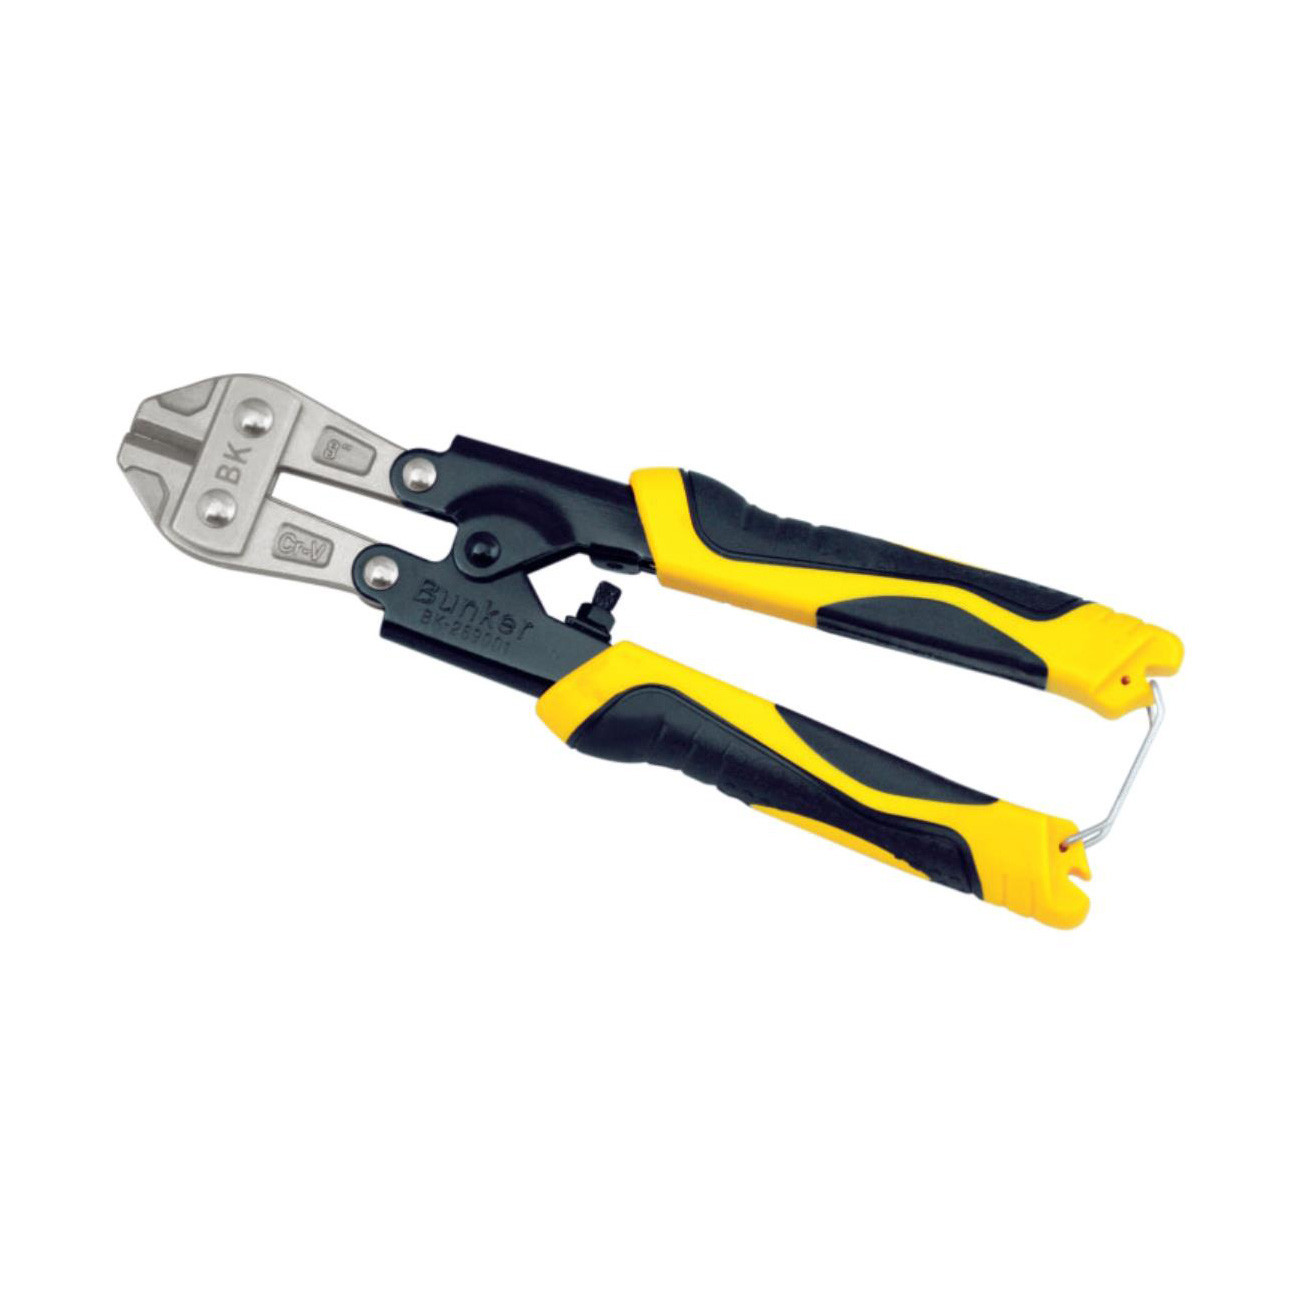 Two-color mini bolt cutters